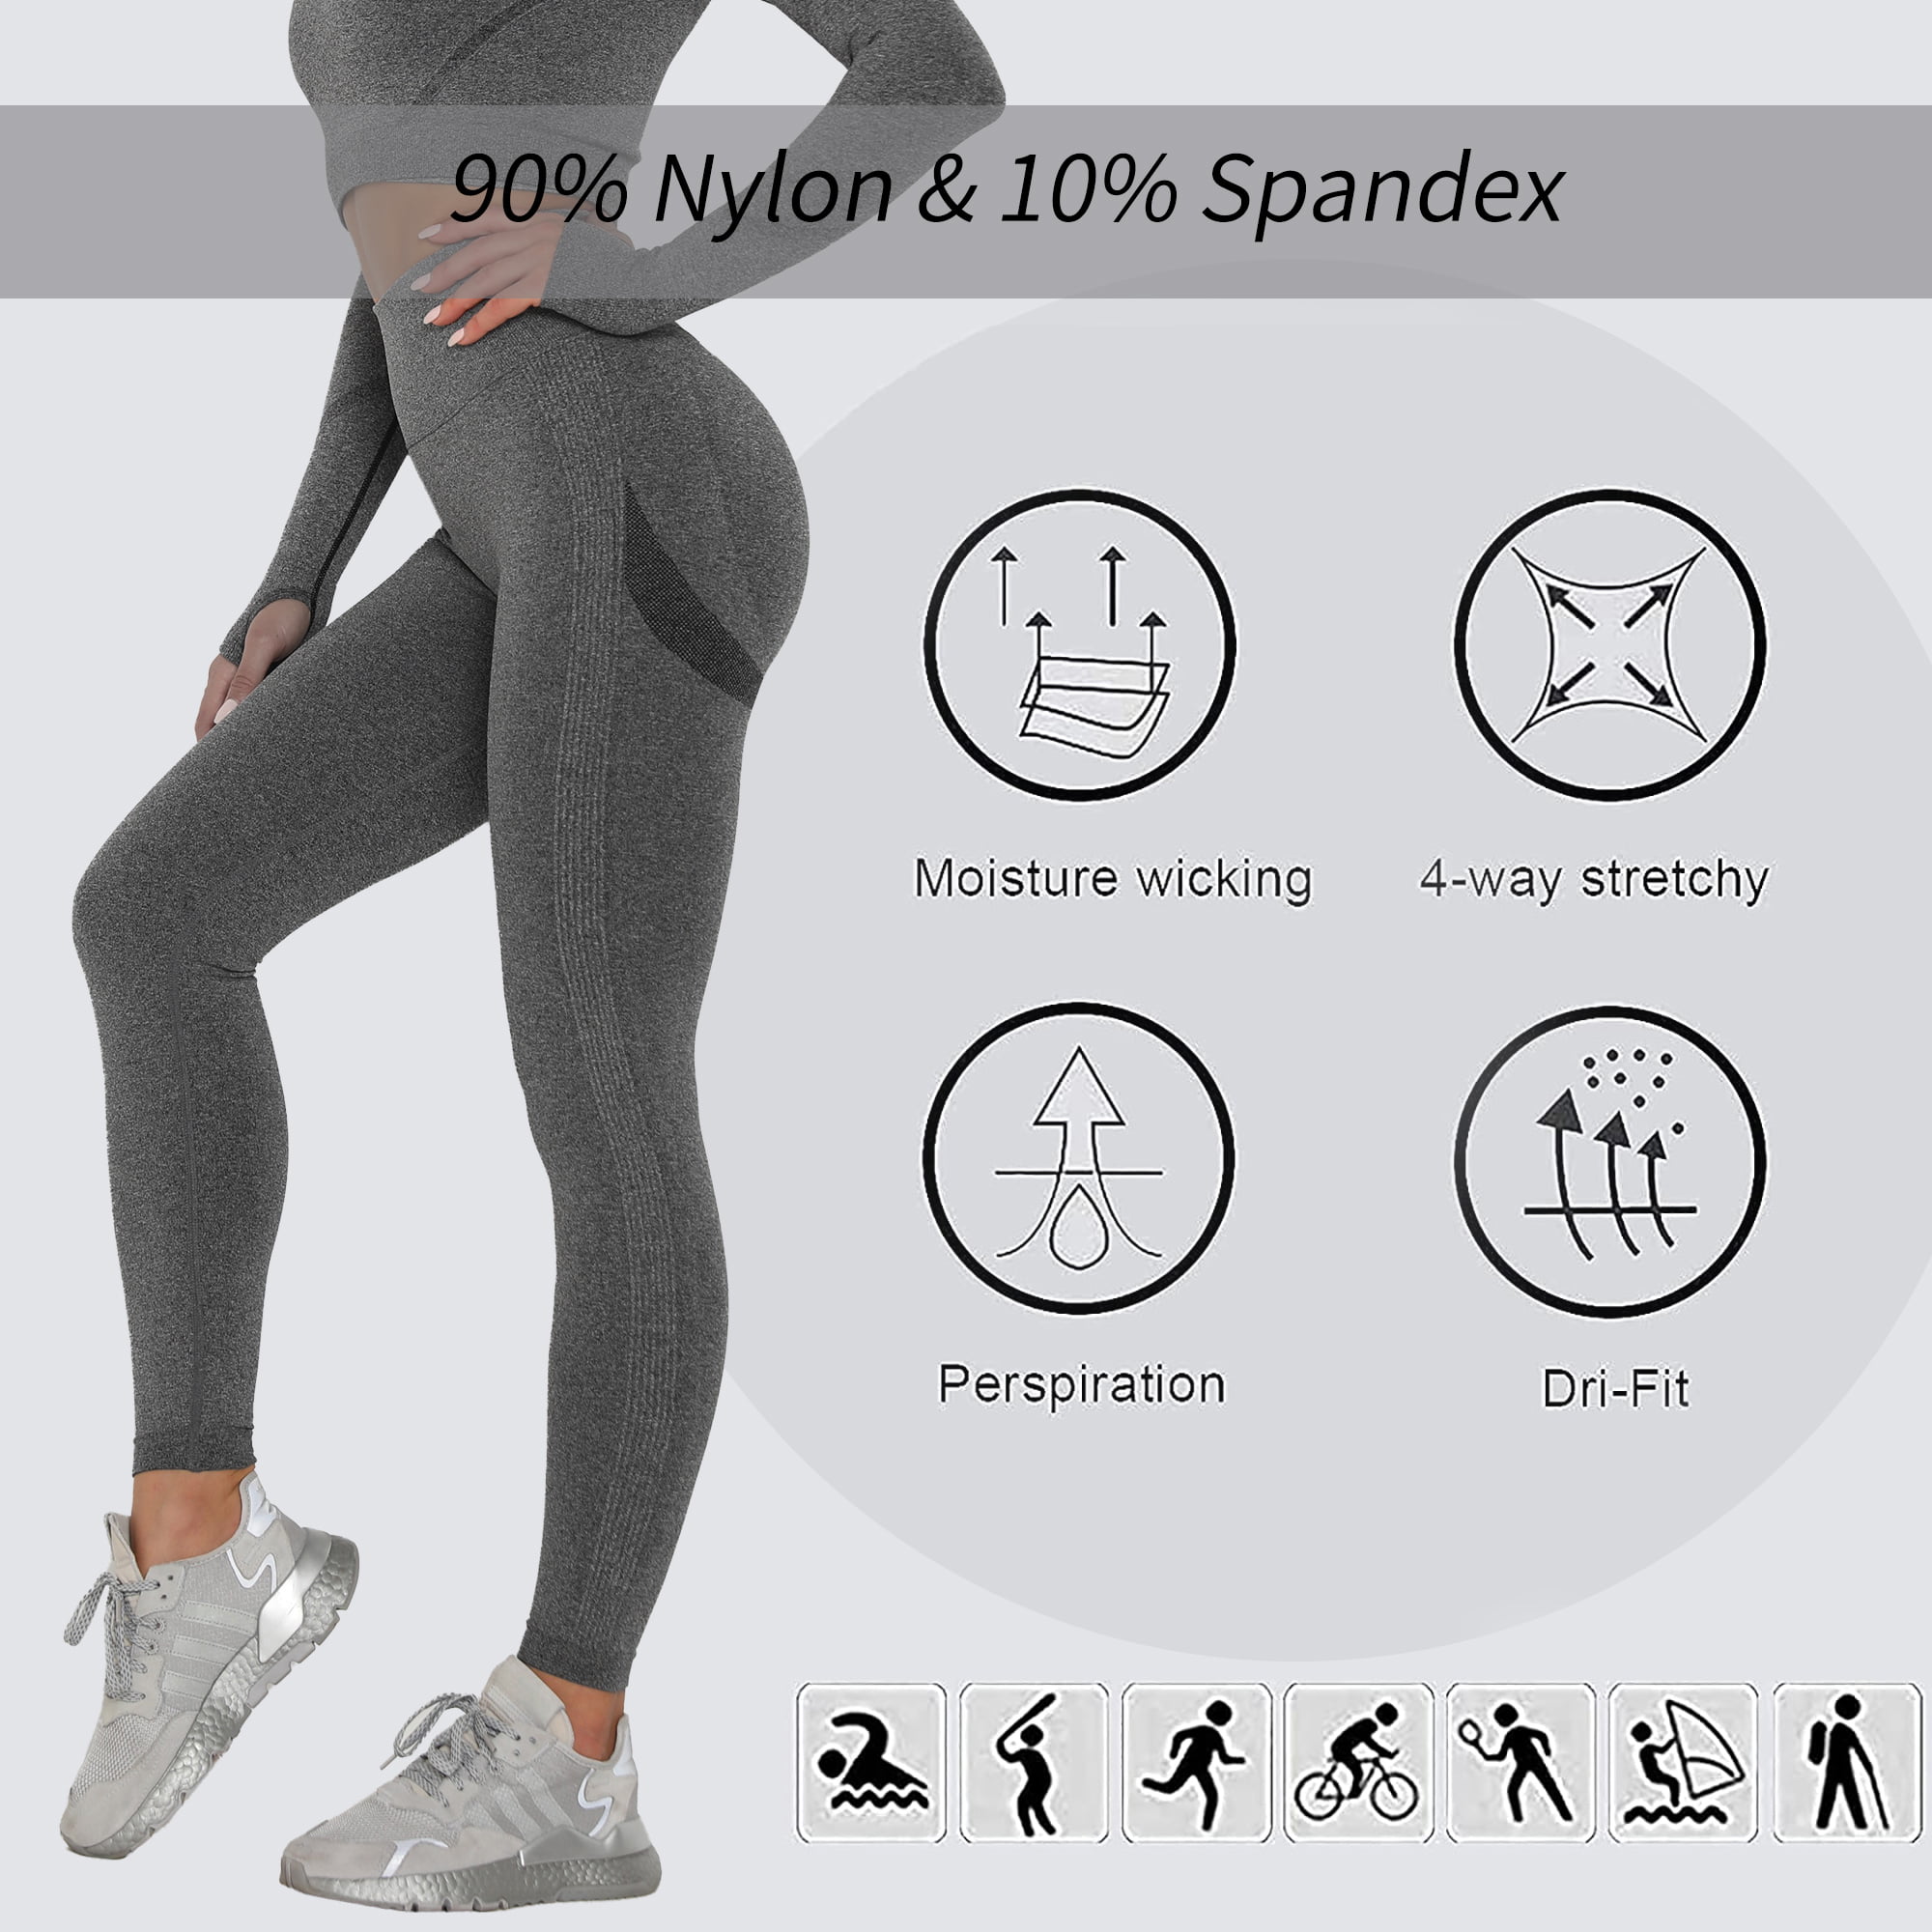 Women's leggings and tights